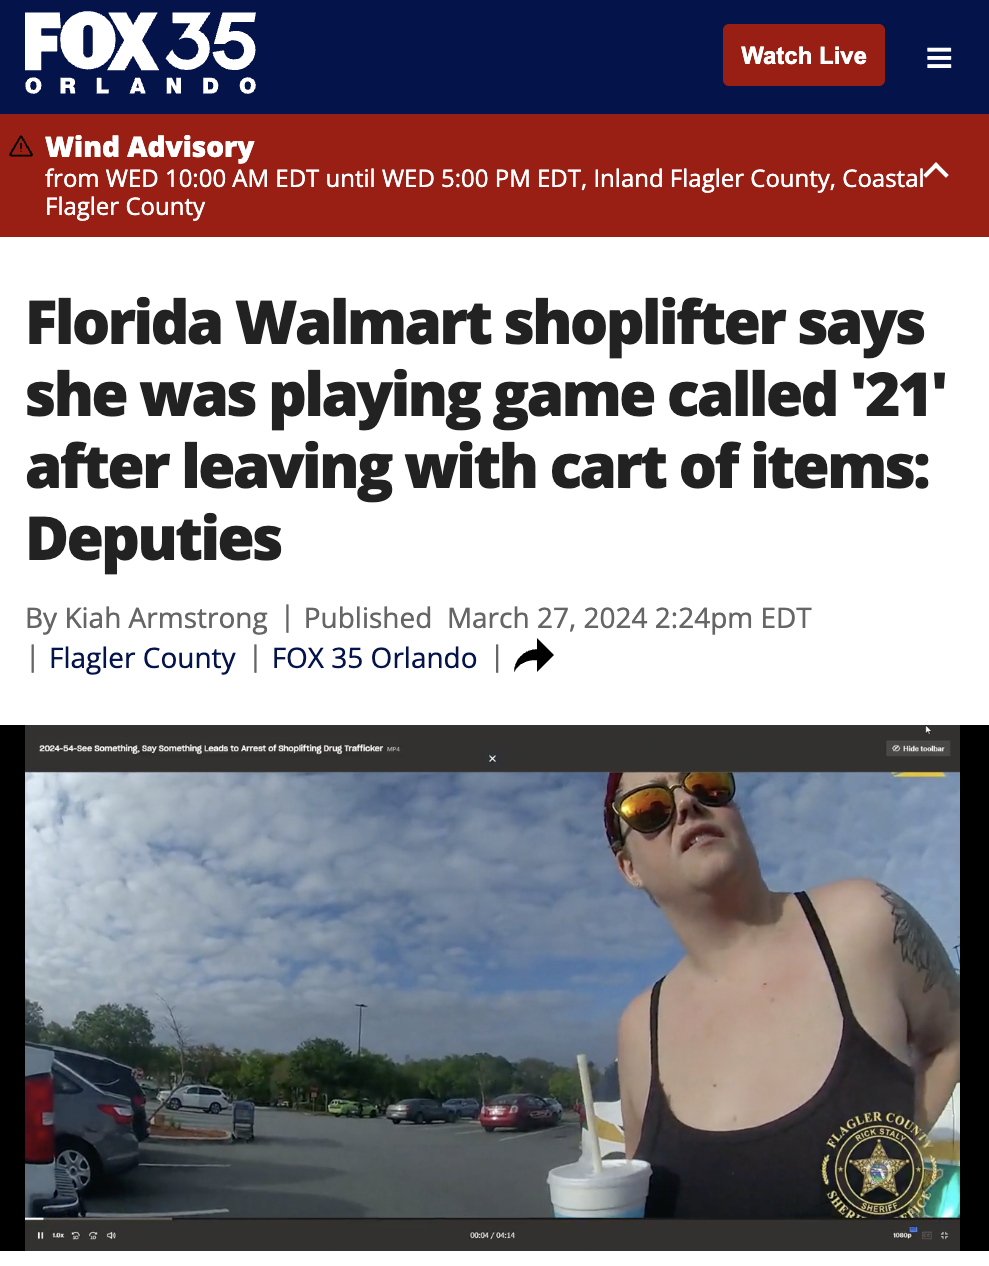 screenshot - Fox 35 Orlando A Wind Advisory Watch Live from Wed Edt until Wed Edt, Inland Flagler County, Coastal^ Flagler County Florida Walmart shoplifter says she was playing game called '21' after leaving with cart of items Deputies By Kiah Armstrong 